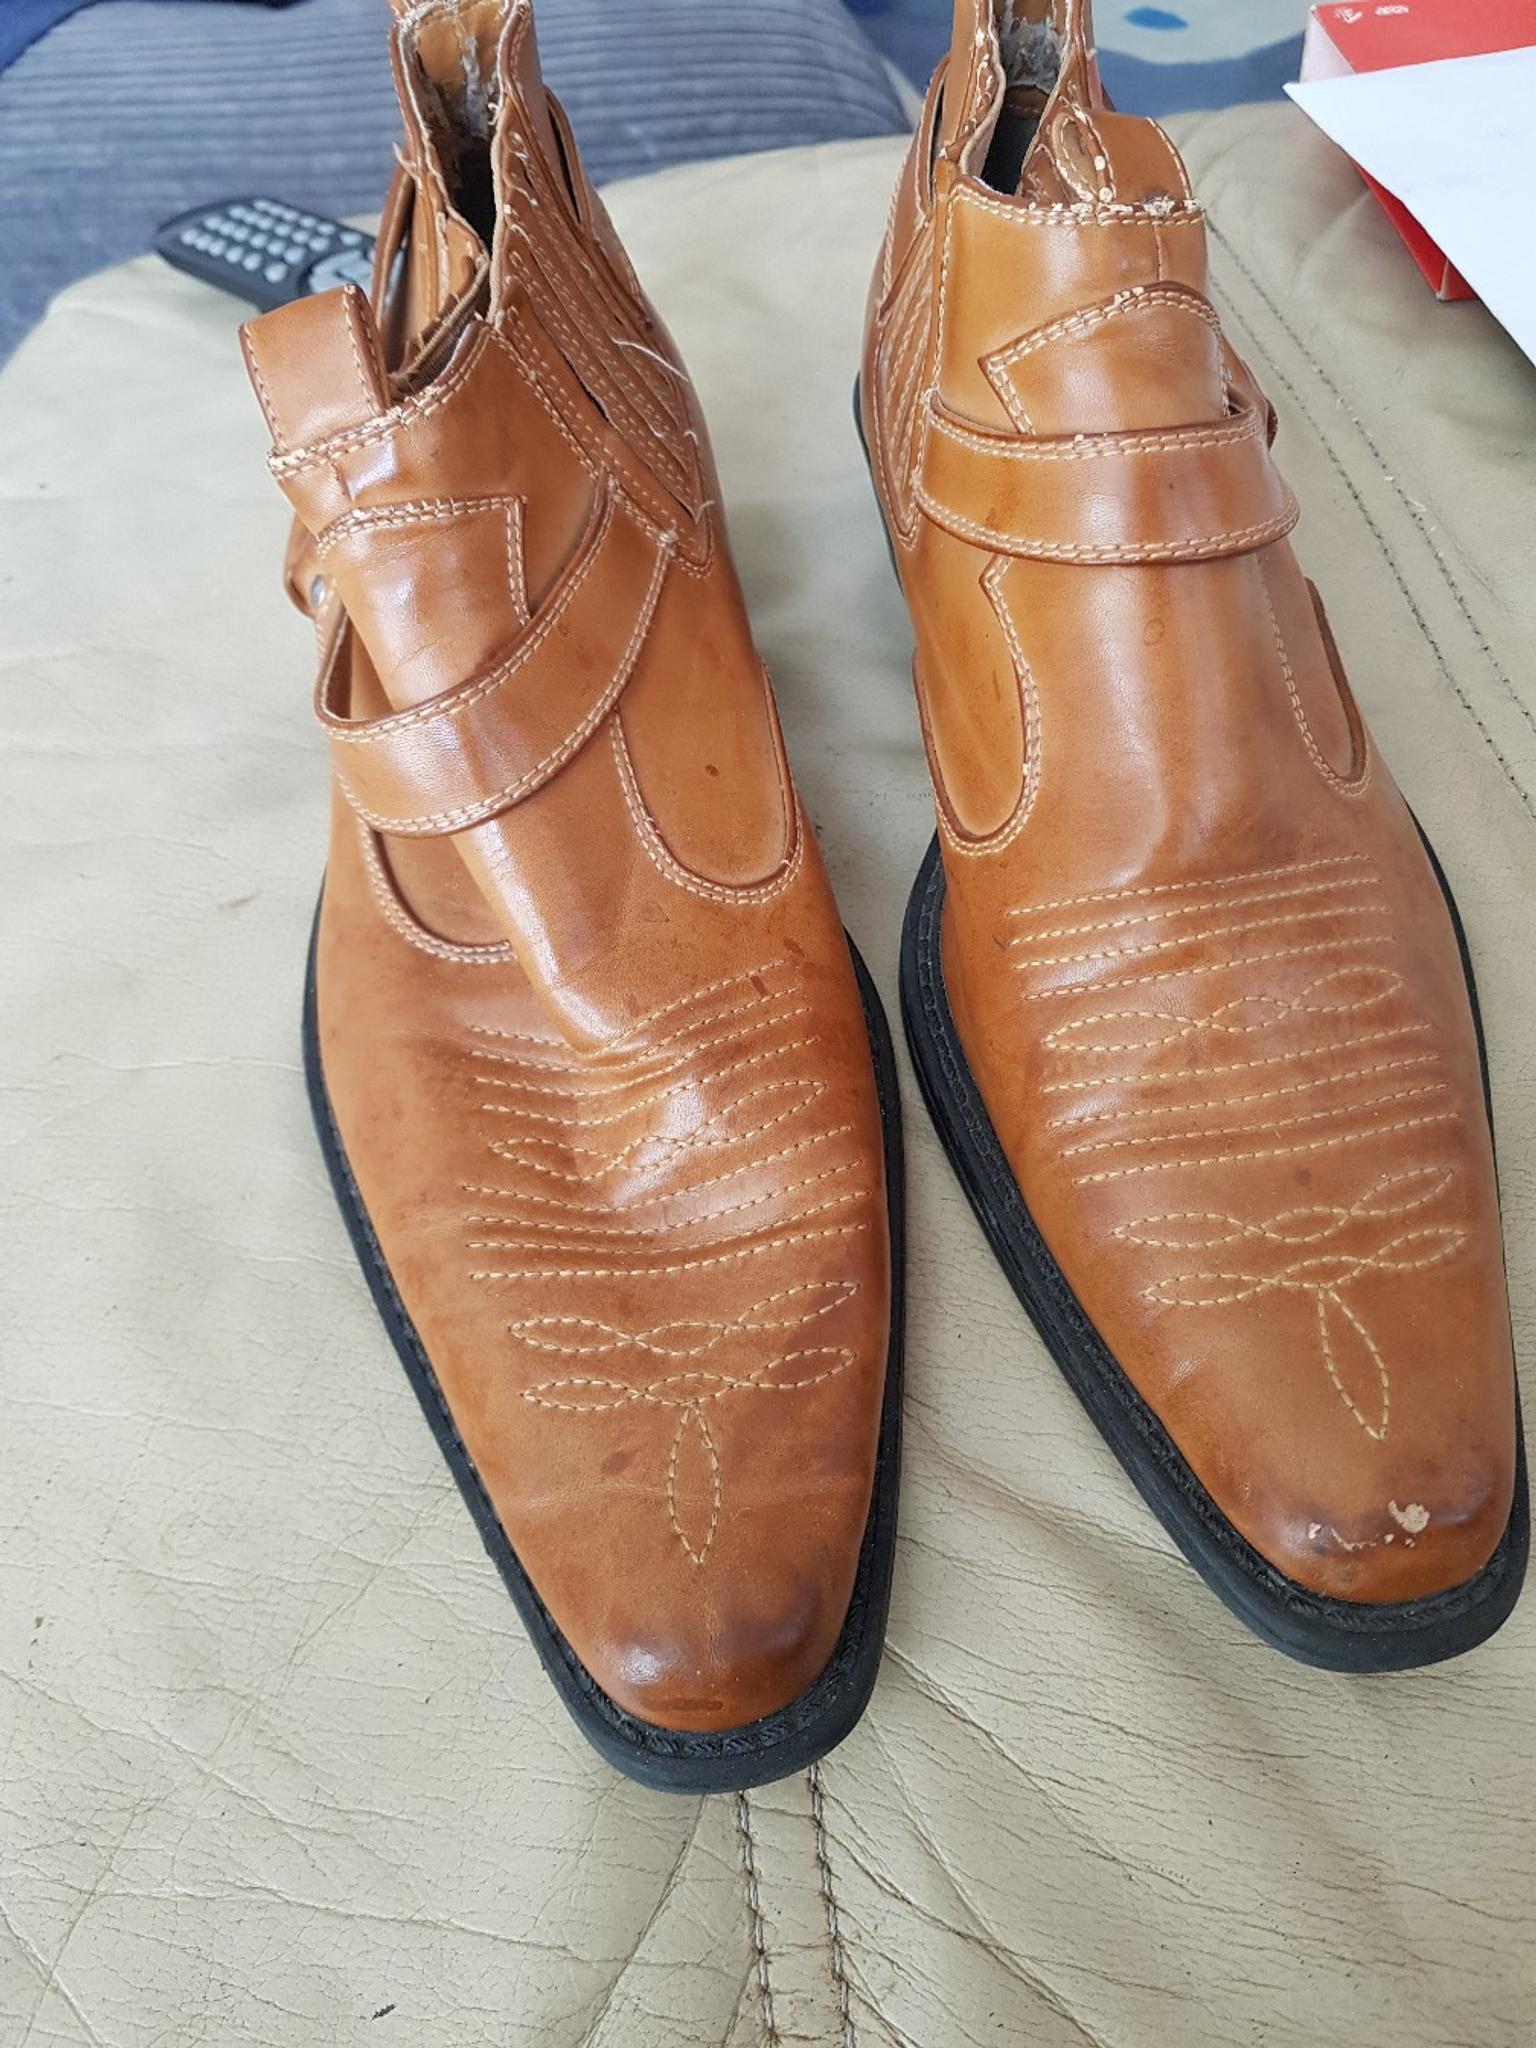 men crocodile Dundee shoes for sale in 